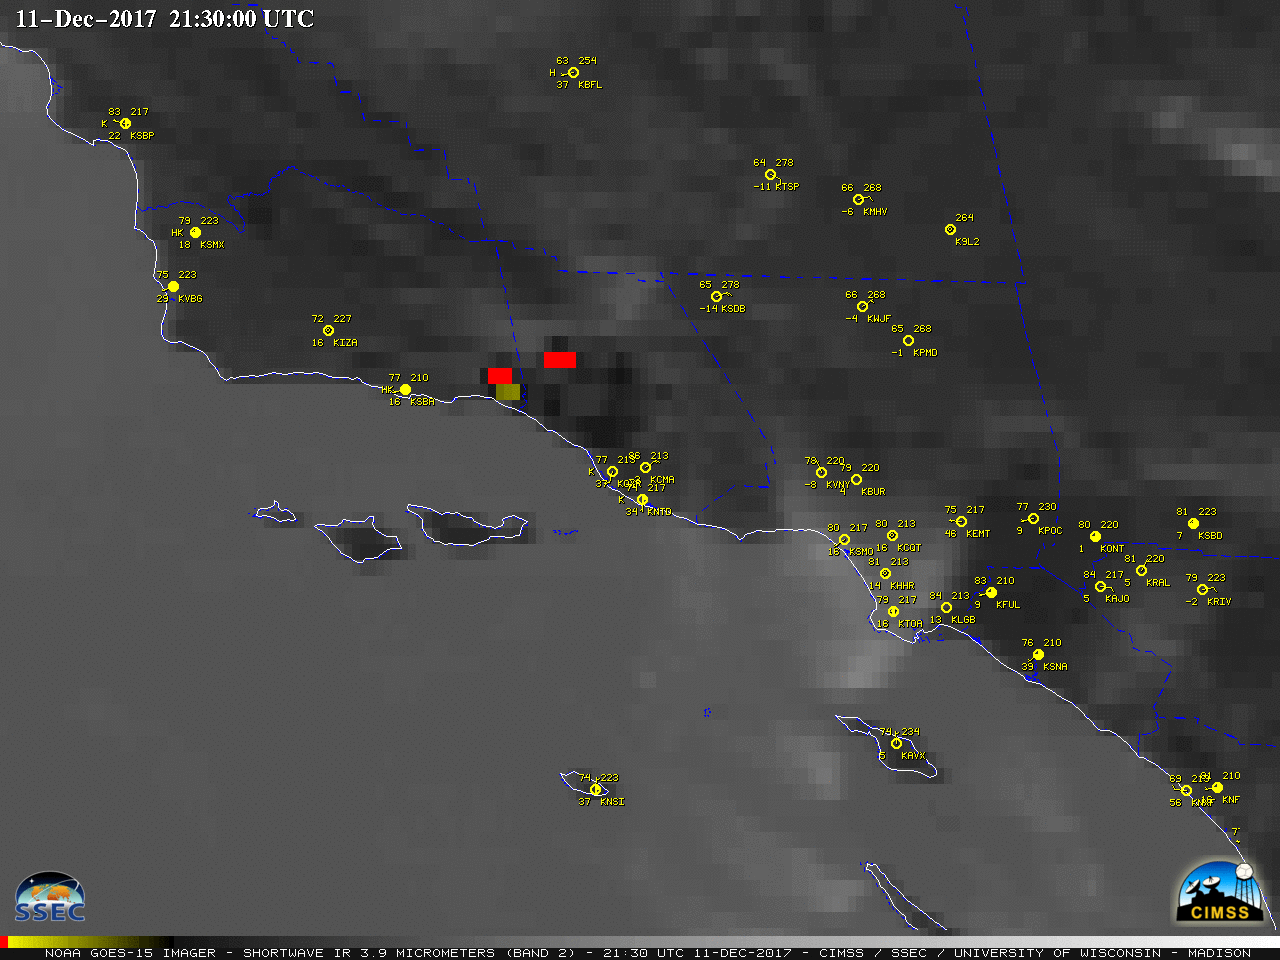 GOES-15 Shortwave Infrared (3.9 µm) images, with hourly surface reports plotted in yellow [click to play animation]